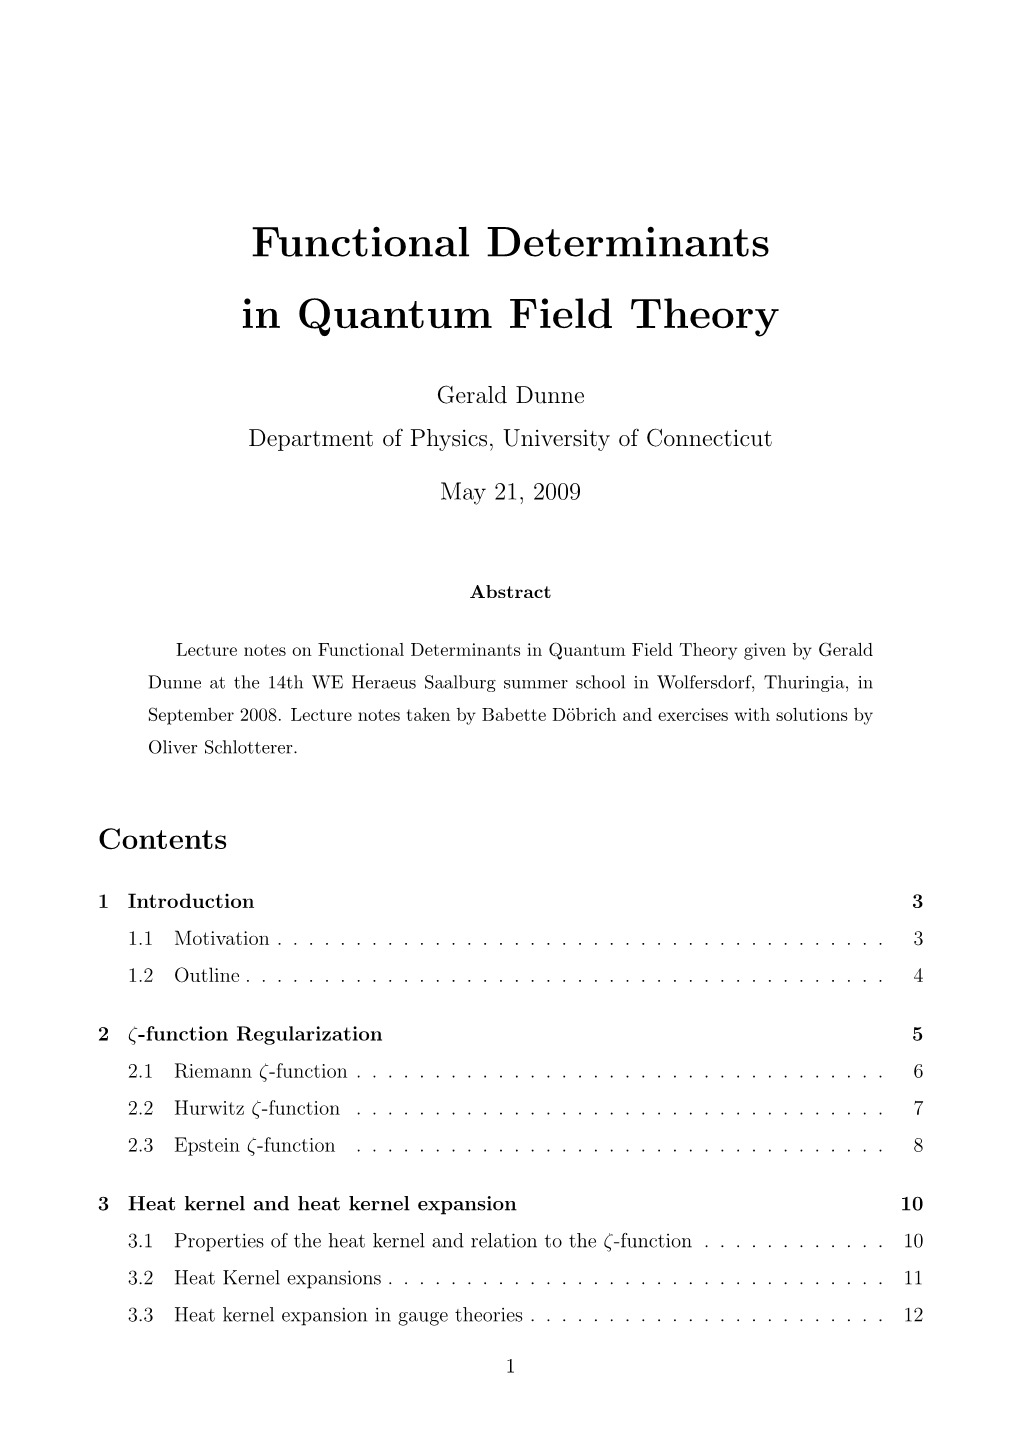 Functional Determinants in Quantum Field Theory